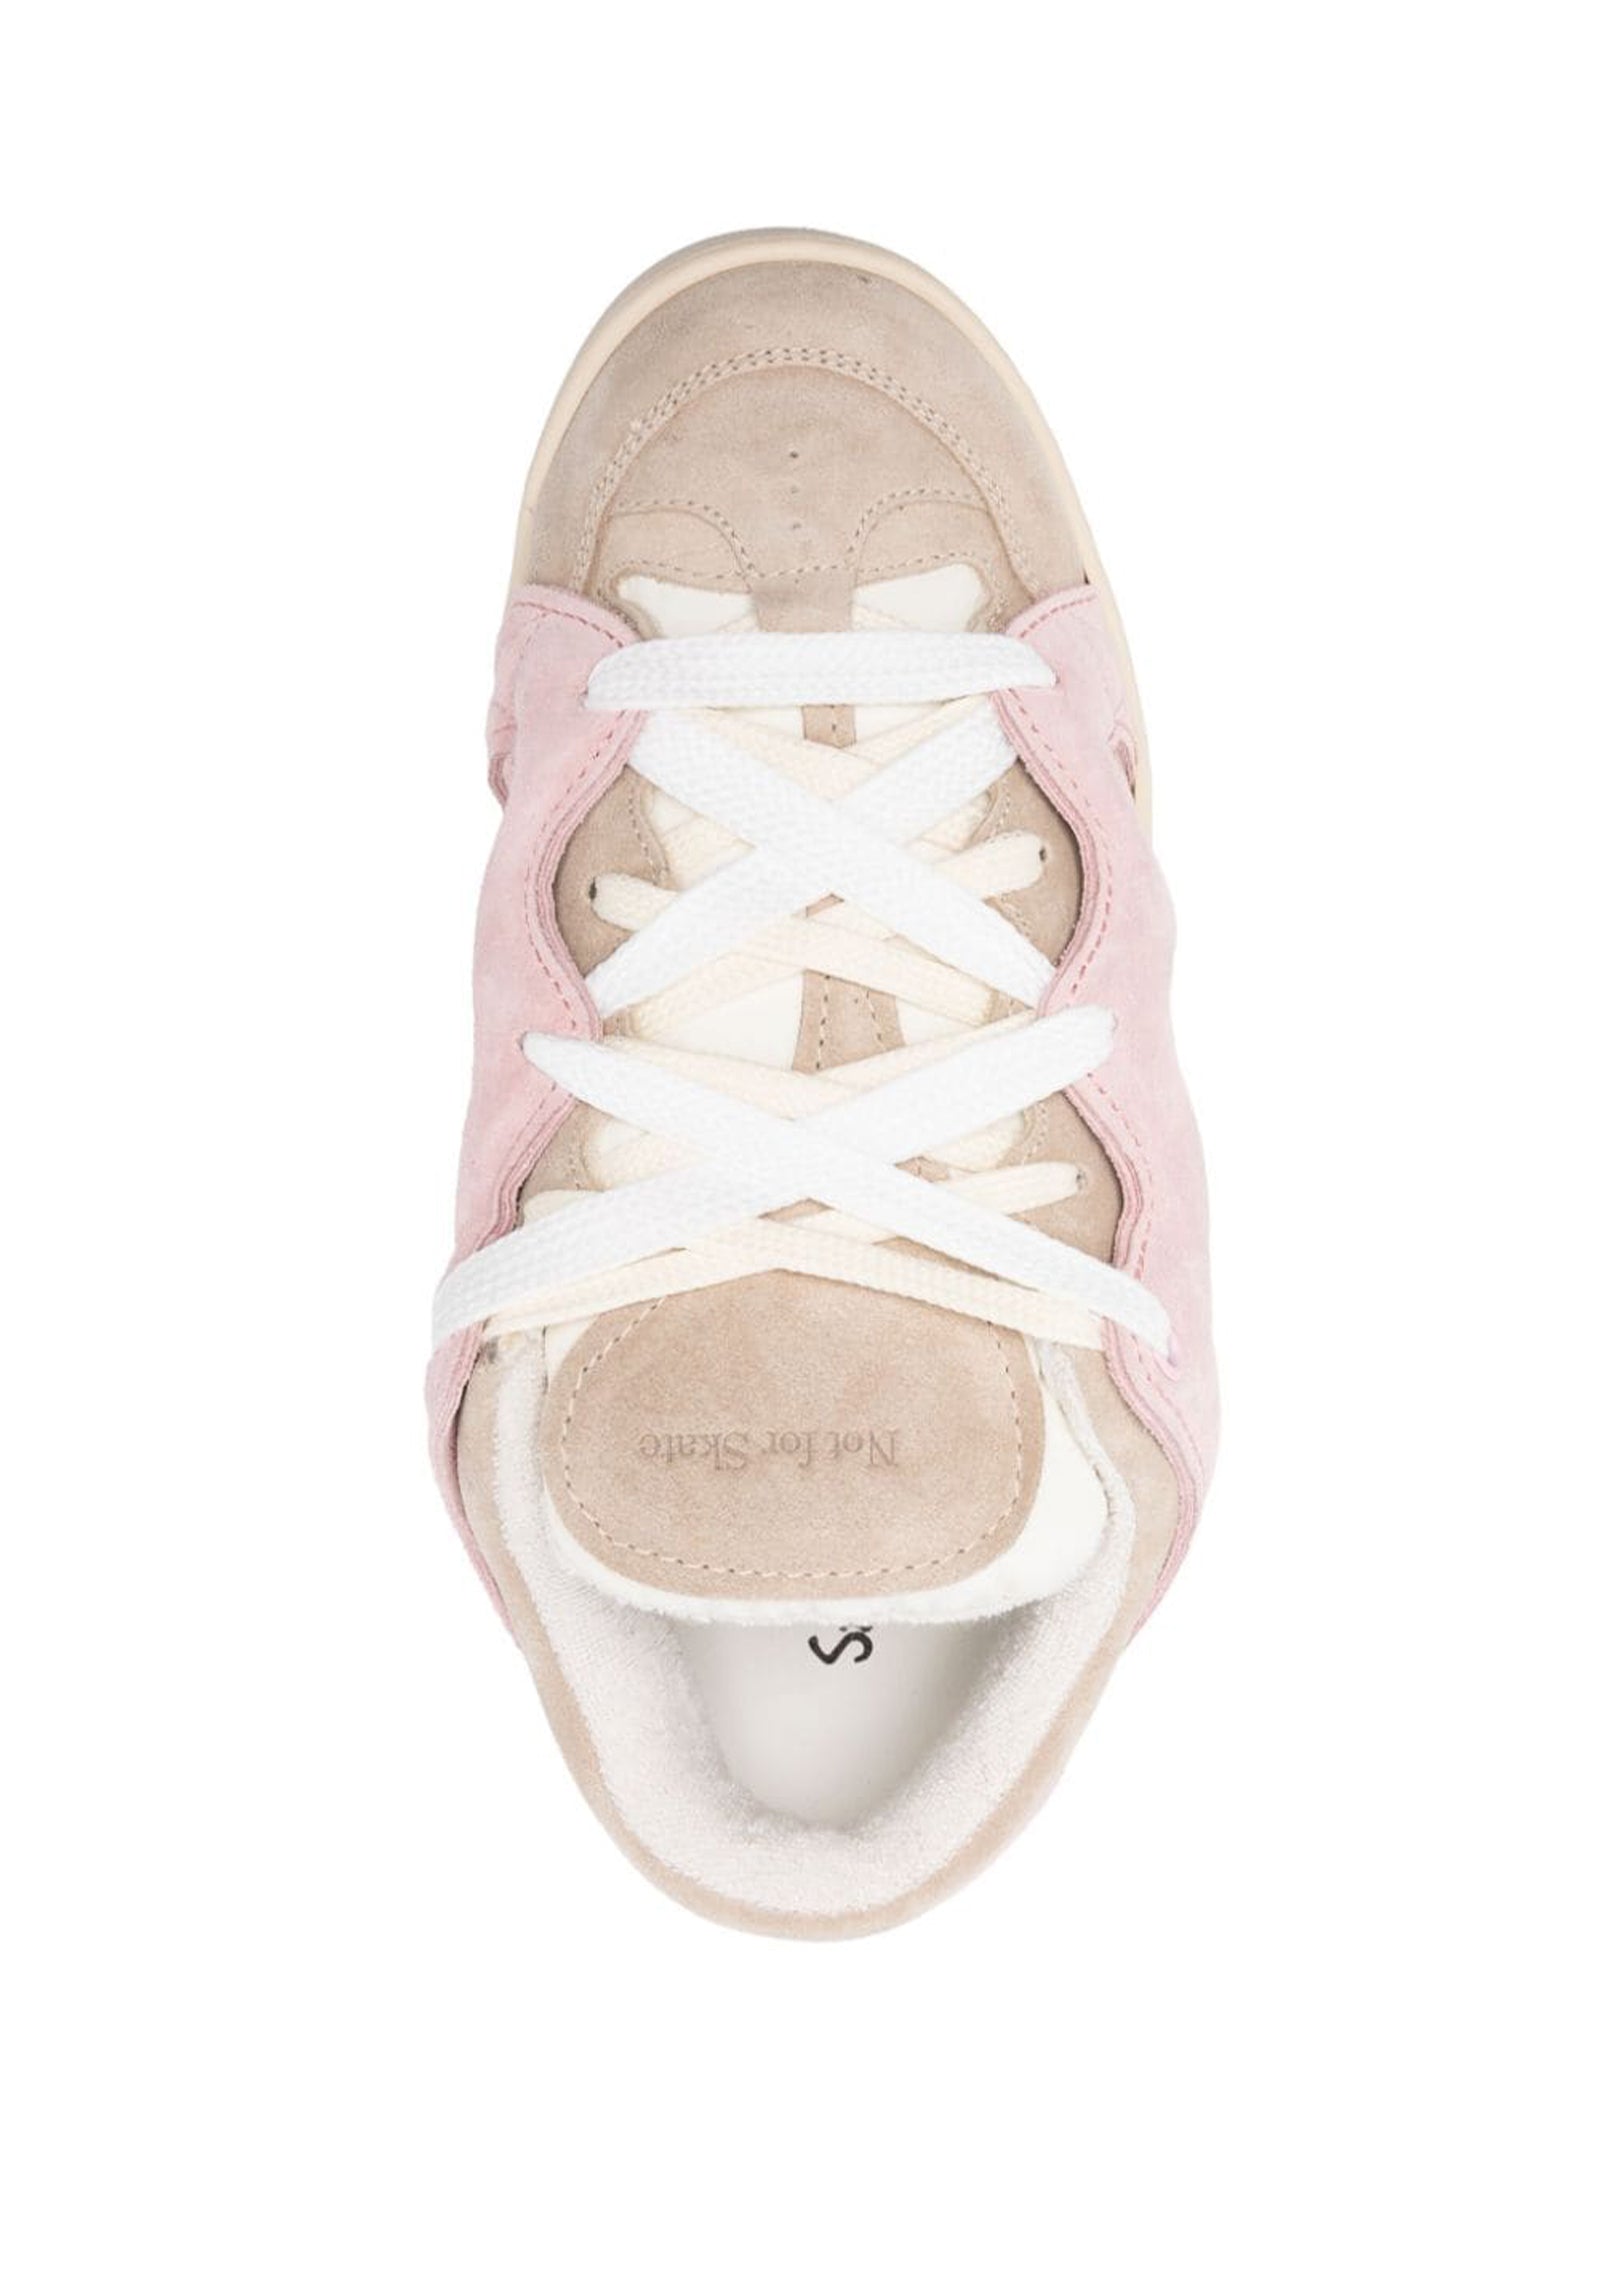 Sneakers Santha Pink/Dove